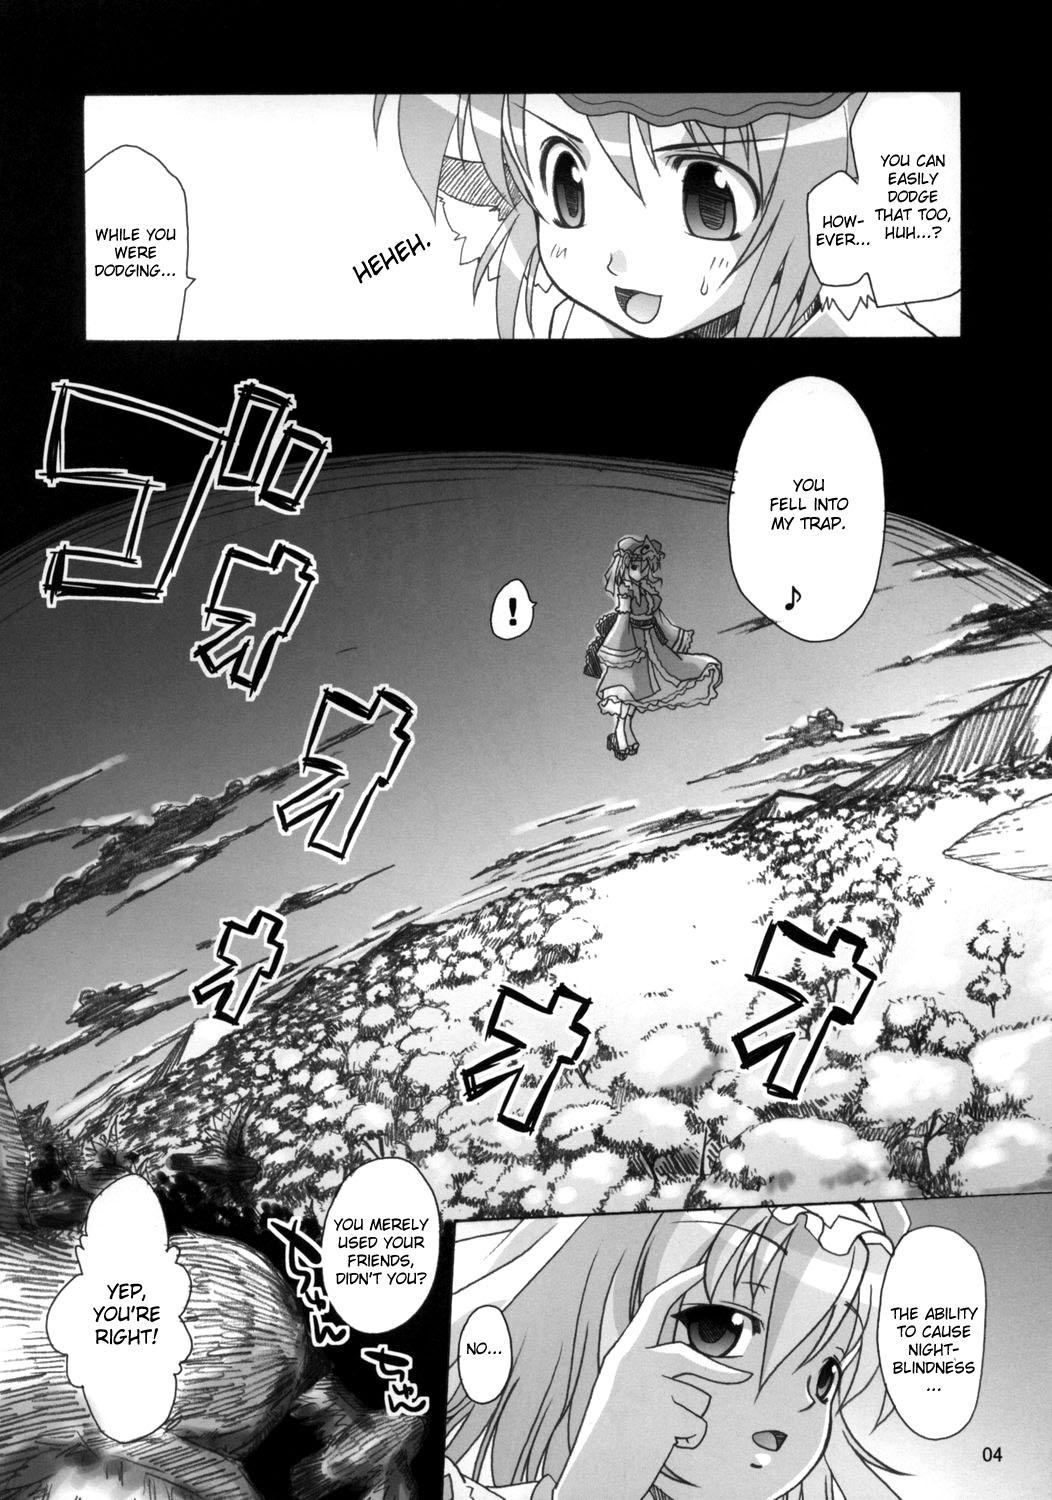 Sextoy Yosuzume no Saezuri |The Night Sparrow’s Chirps - Touhou project Gay Shaved - Page 4